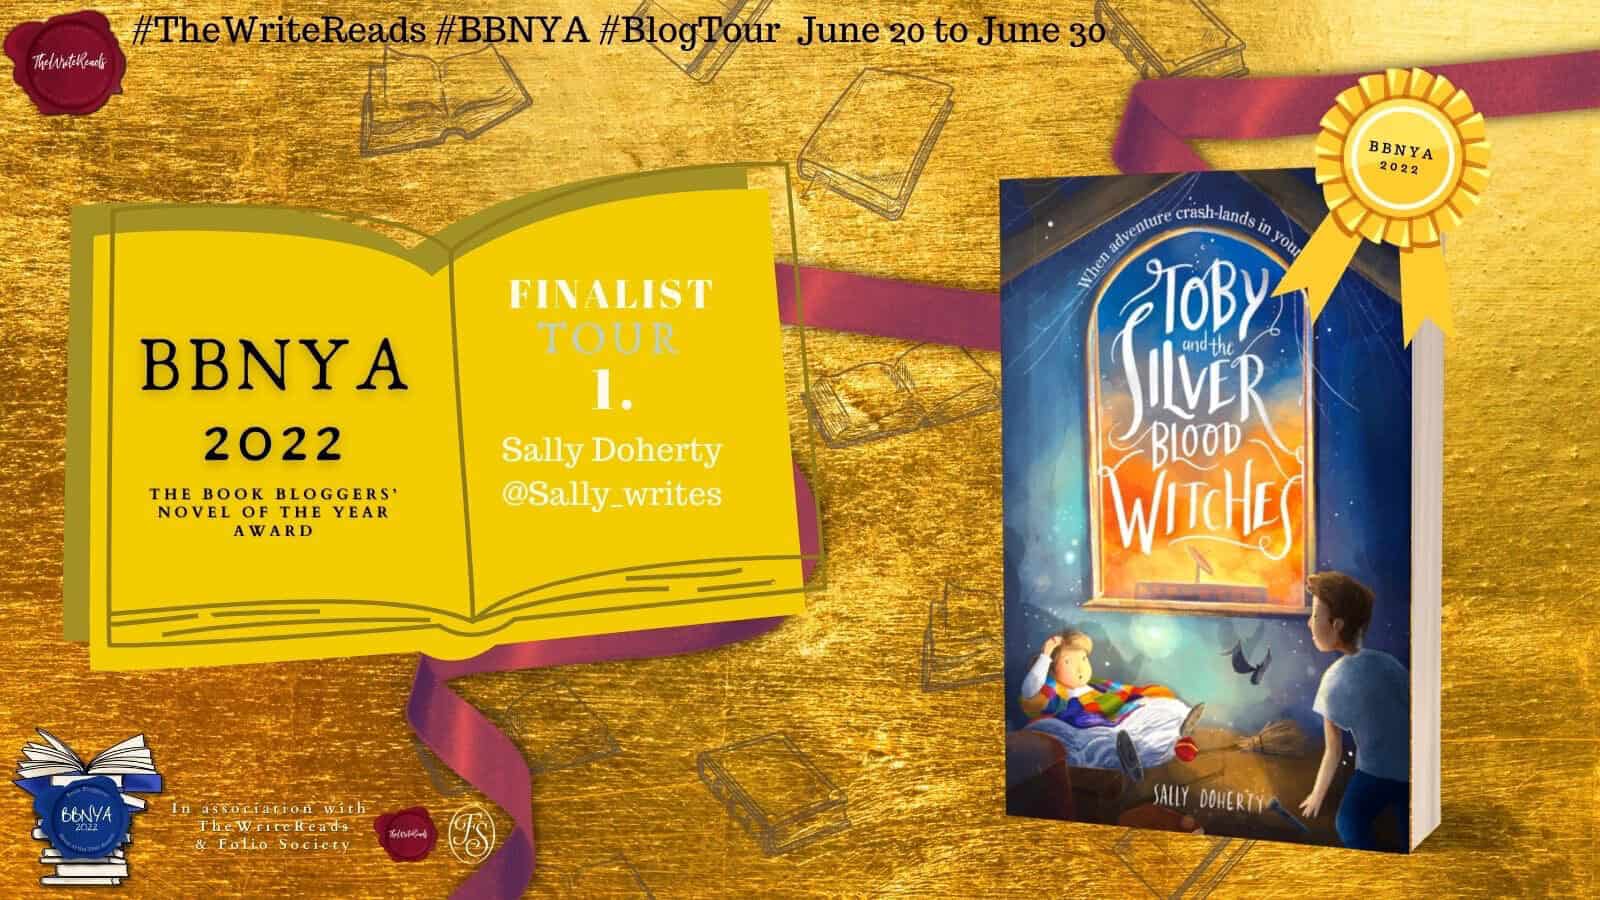 BBNYA Winner's Tour: #1 ~ Toby and the Silver Blood Witches by Sally Doherty | Book Review